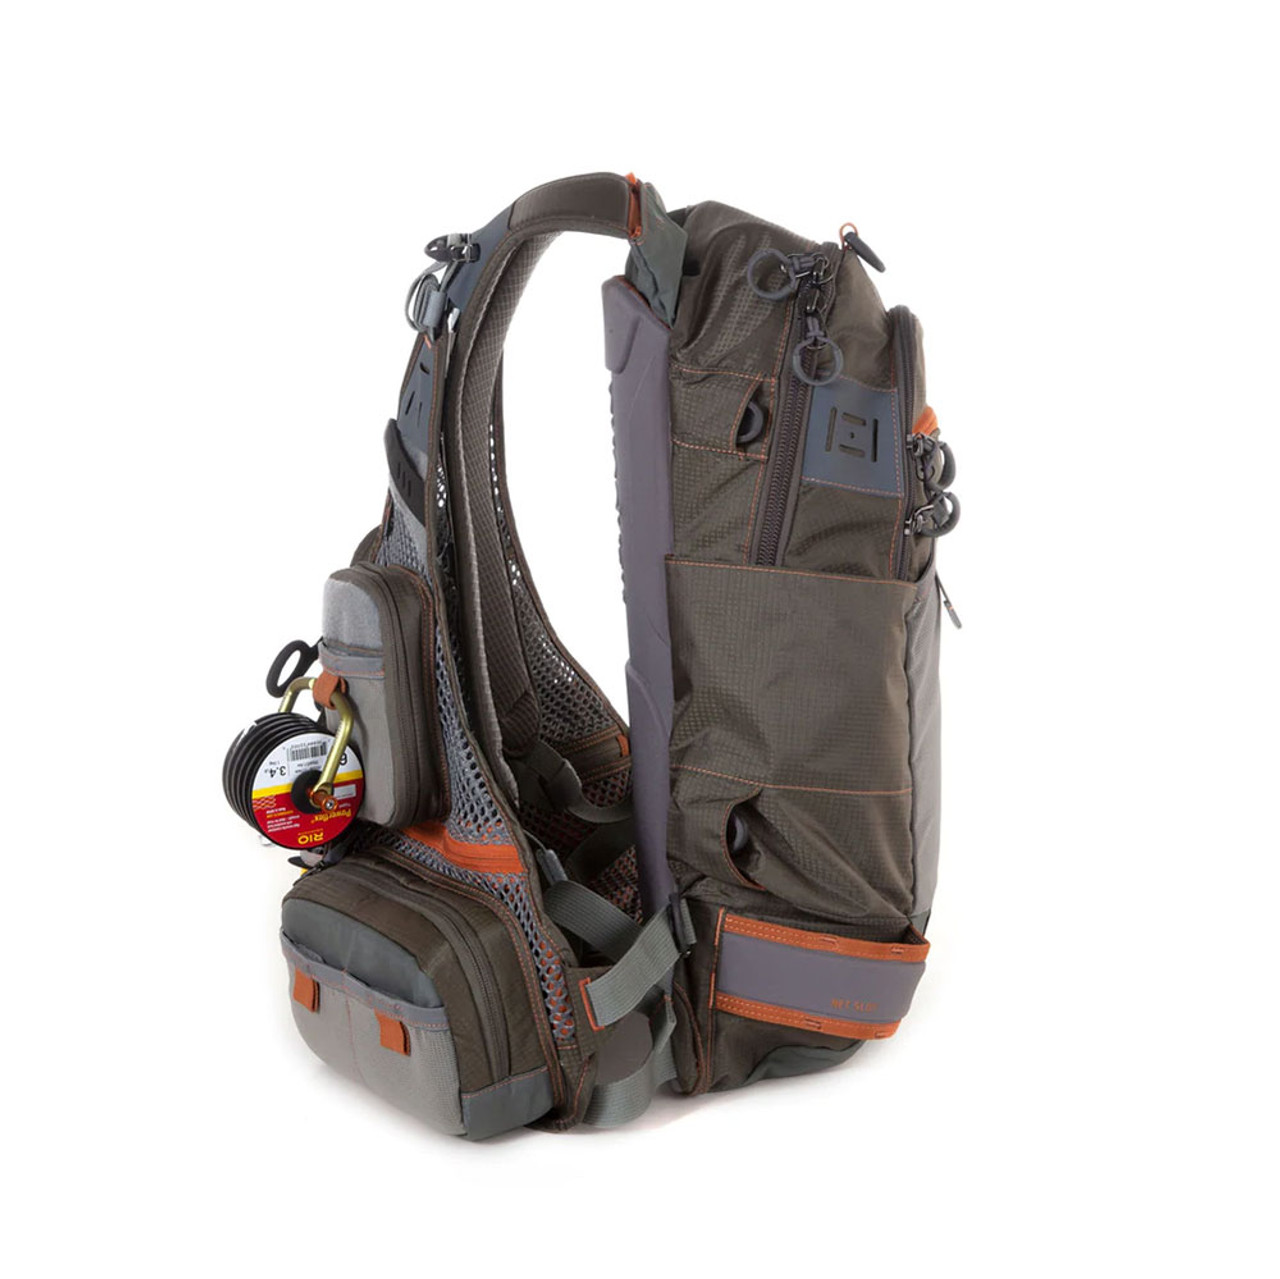 Fishpond Ridgeline Tech Pack - Armadale Angling